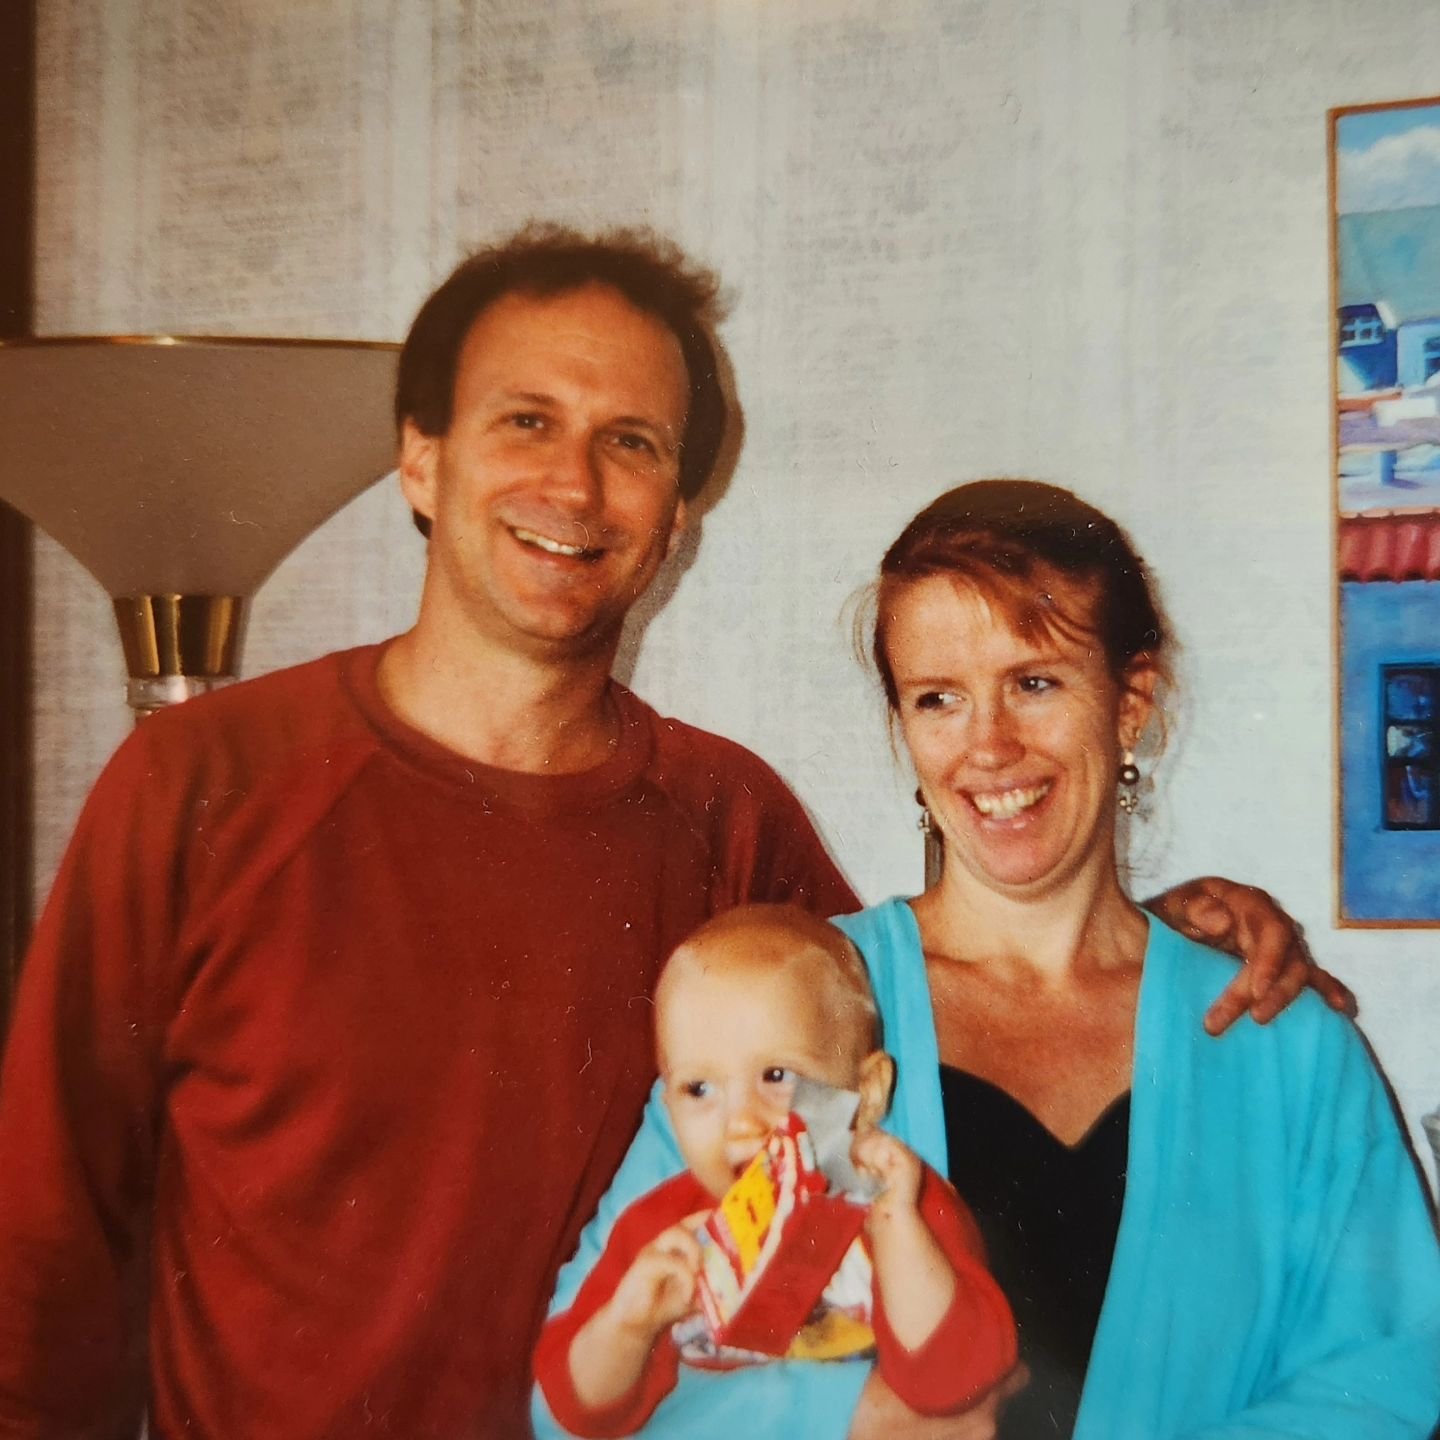 Our 35th Anniversary! Almost half my life, and as my husband said, the better half. Feel blessed. 

First photo: We were so young! Photo with our son Will, whose birthday is 2 days  before our anniversary.

Second photo: Sunday at San Jose Opera.

Th